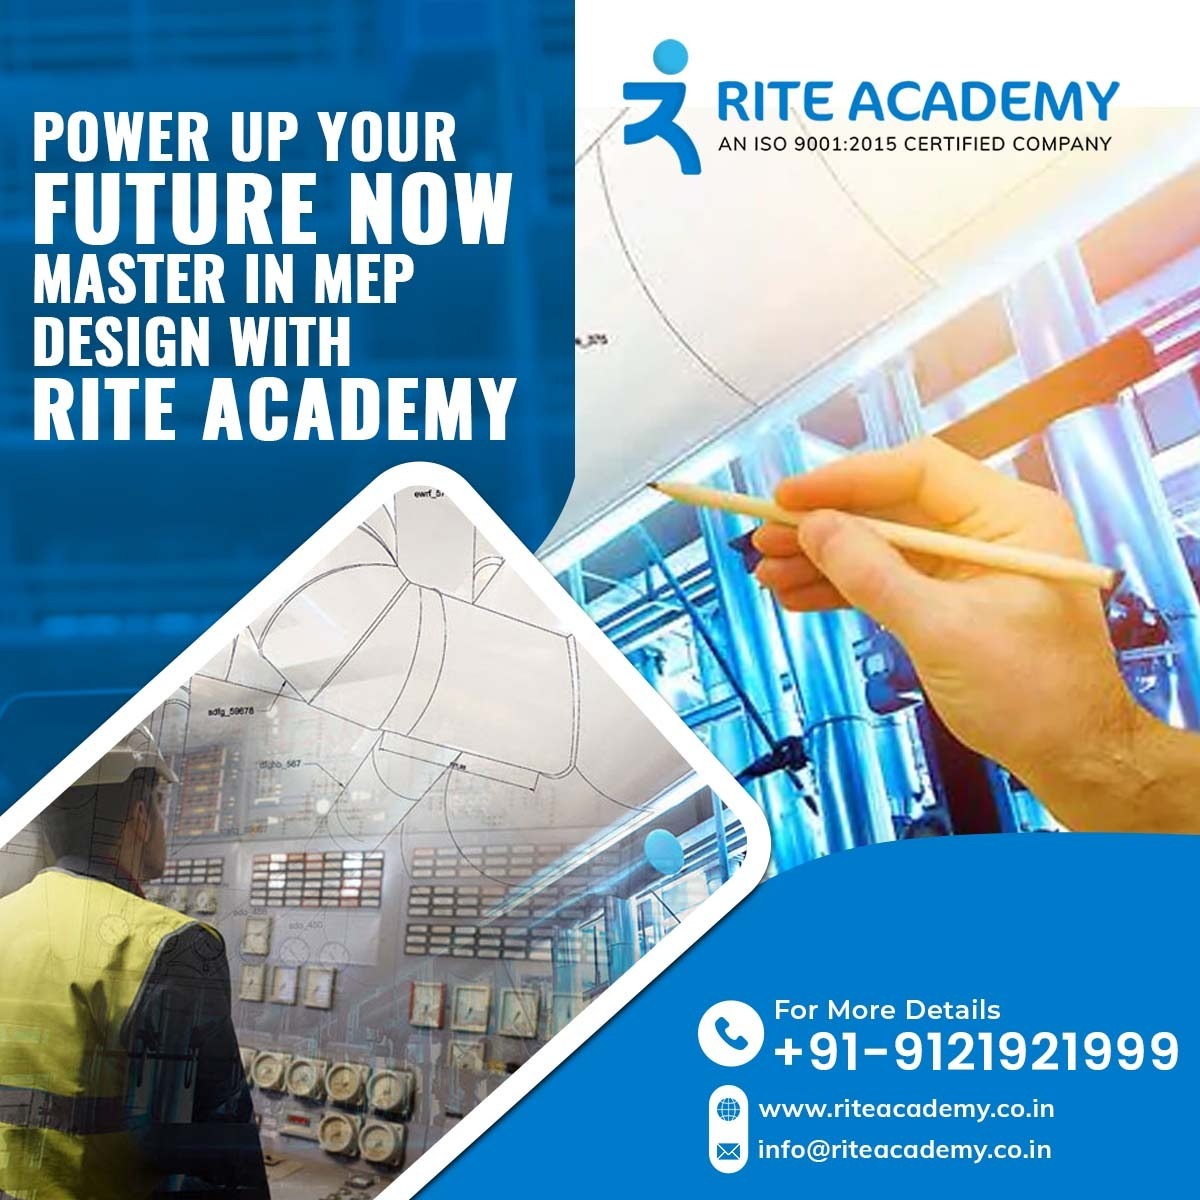 Power up your future with a Master's in MEP Design Course in Hyderabad! Level up your skills at #RITEAcademy. 🔧✨

Visit our website to secure your reservation or give us a call for the #MEPtraining #course in #Hyderabad.

#mep #mepcourse #riteacademy #onlinemeptraining